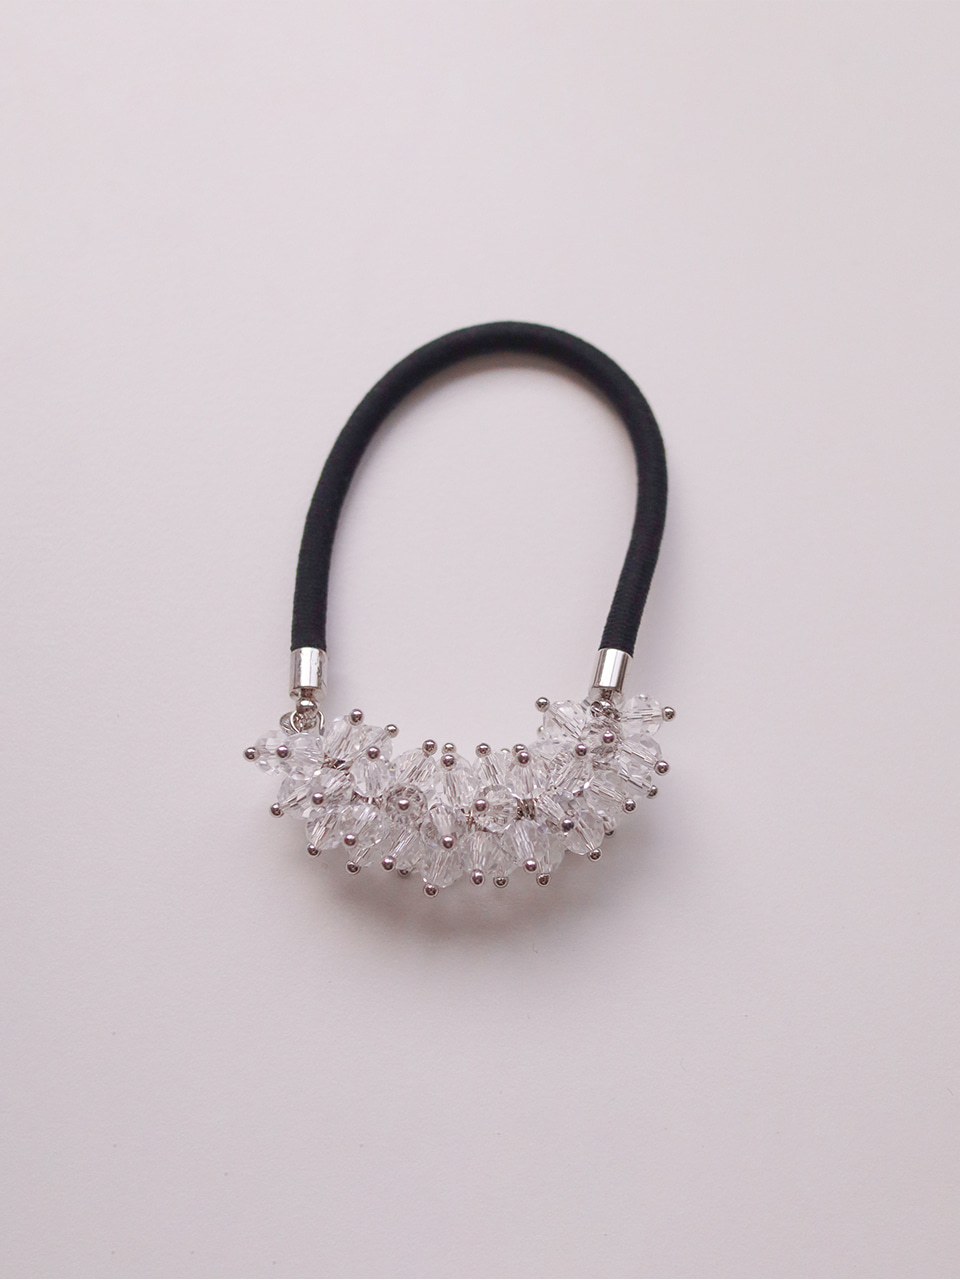 transparent beads hair tie silver